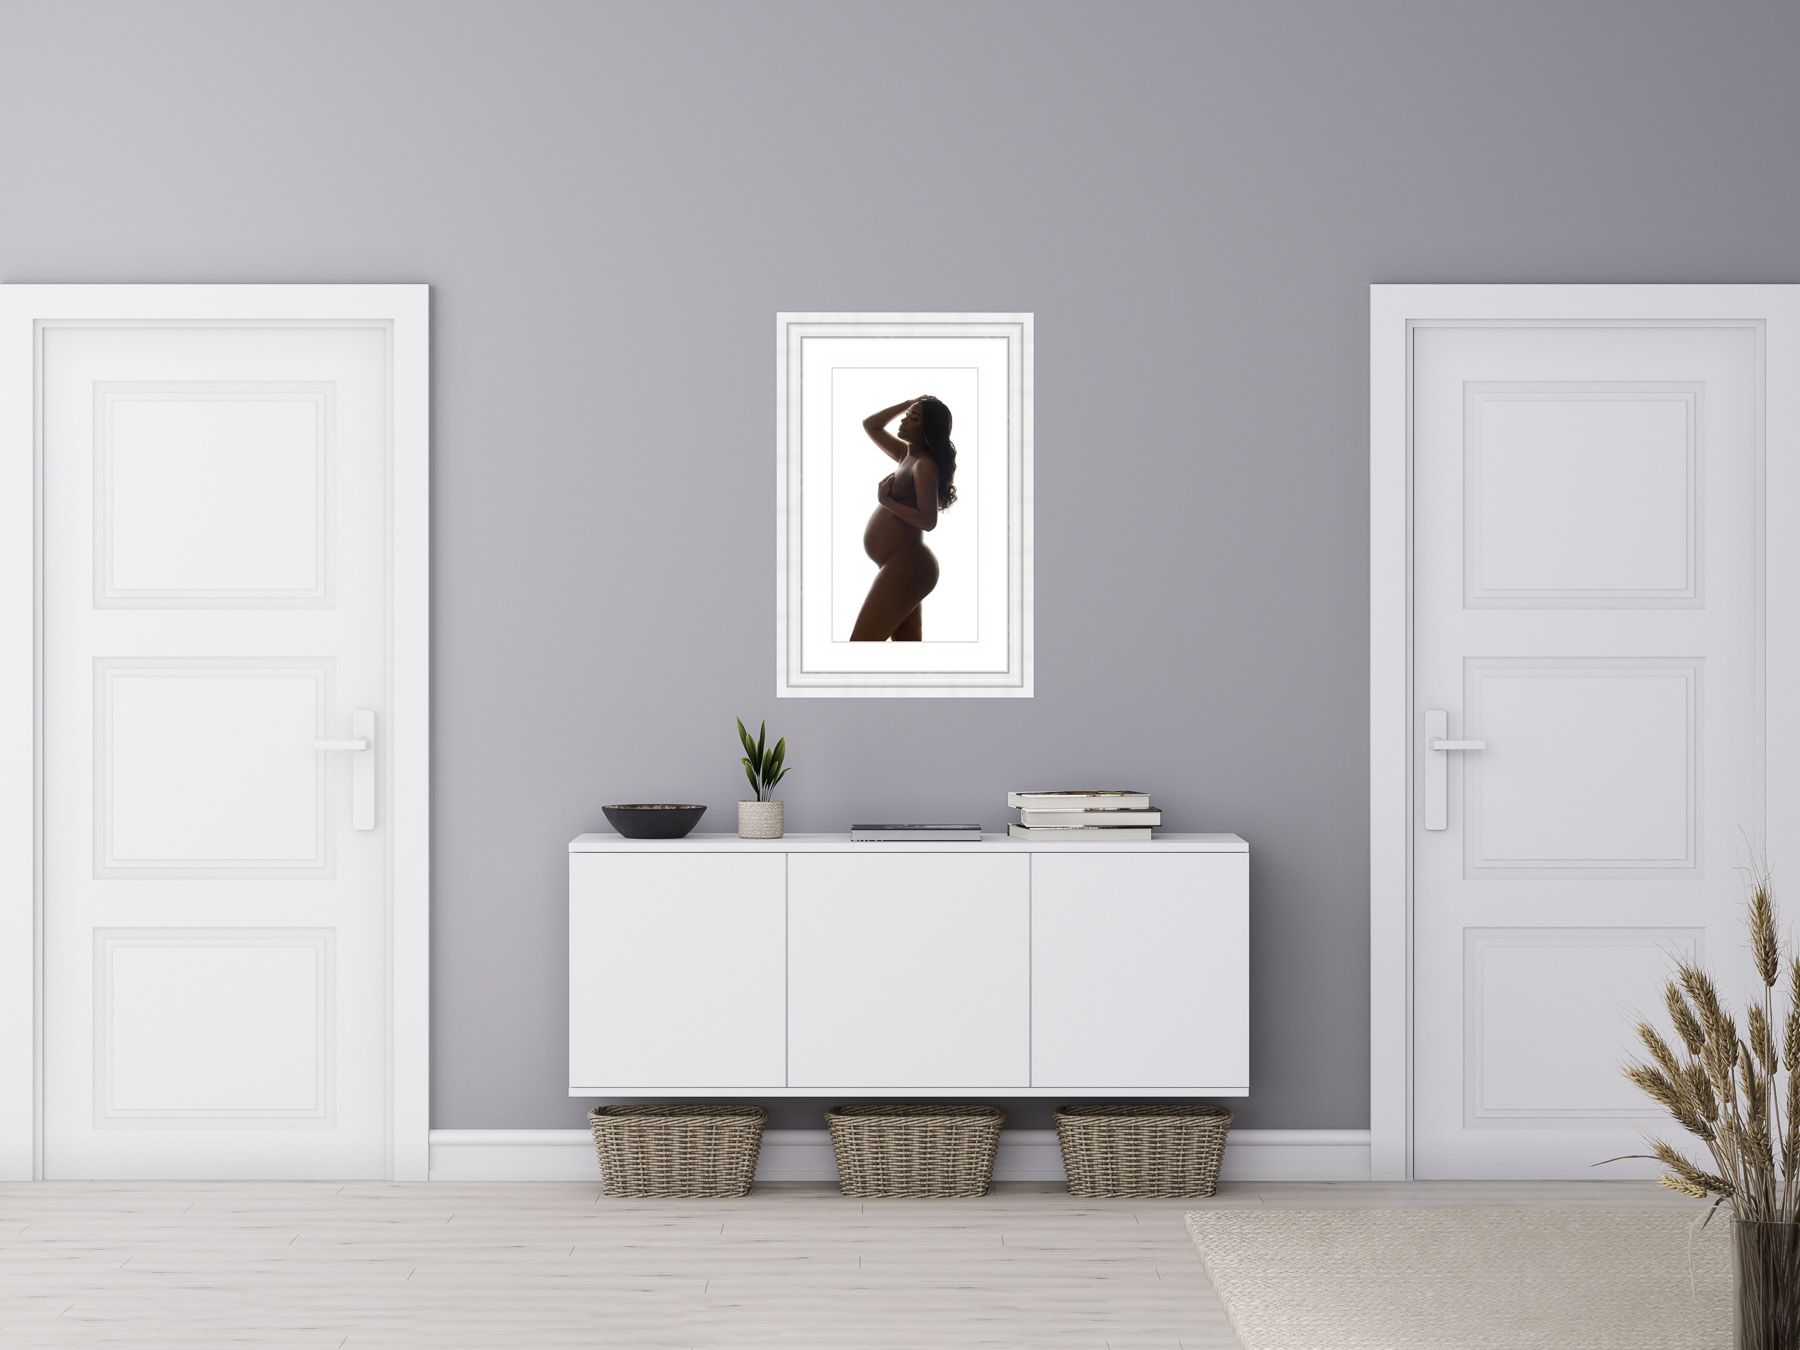 Simple framed wall art portrait from New York maternity photographer